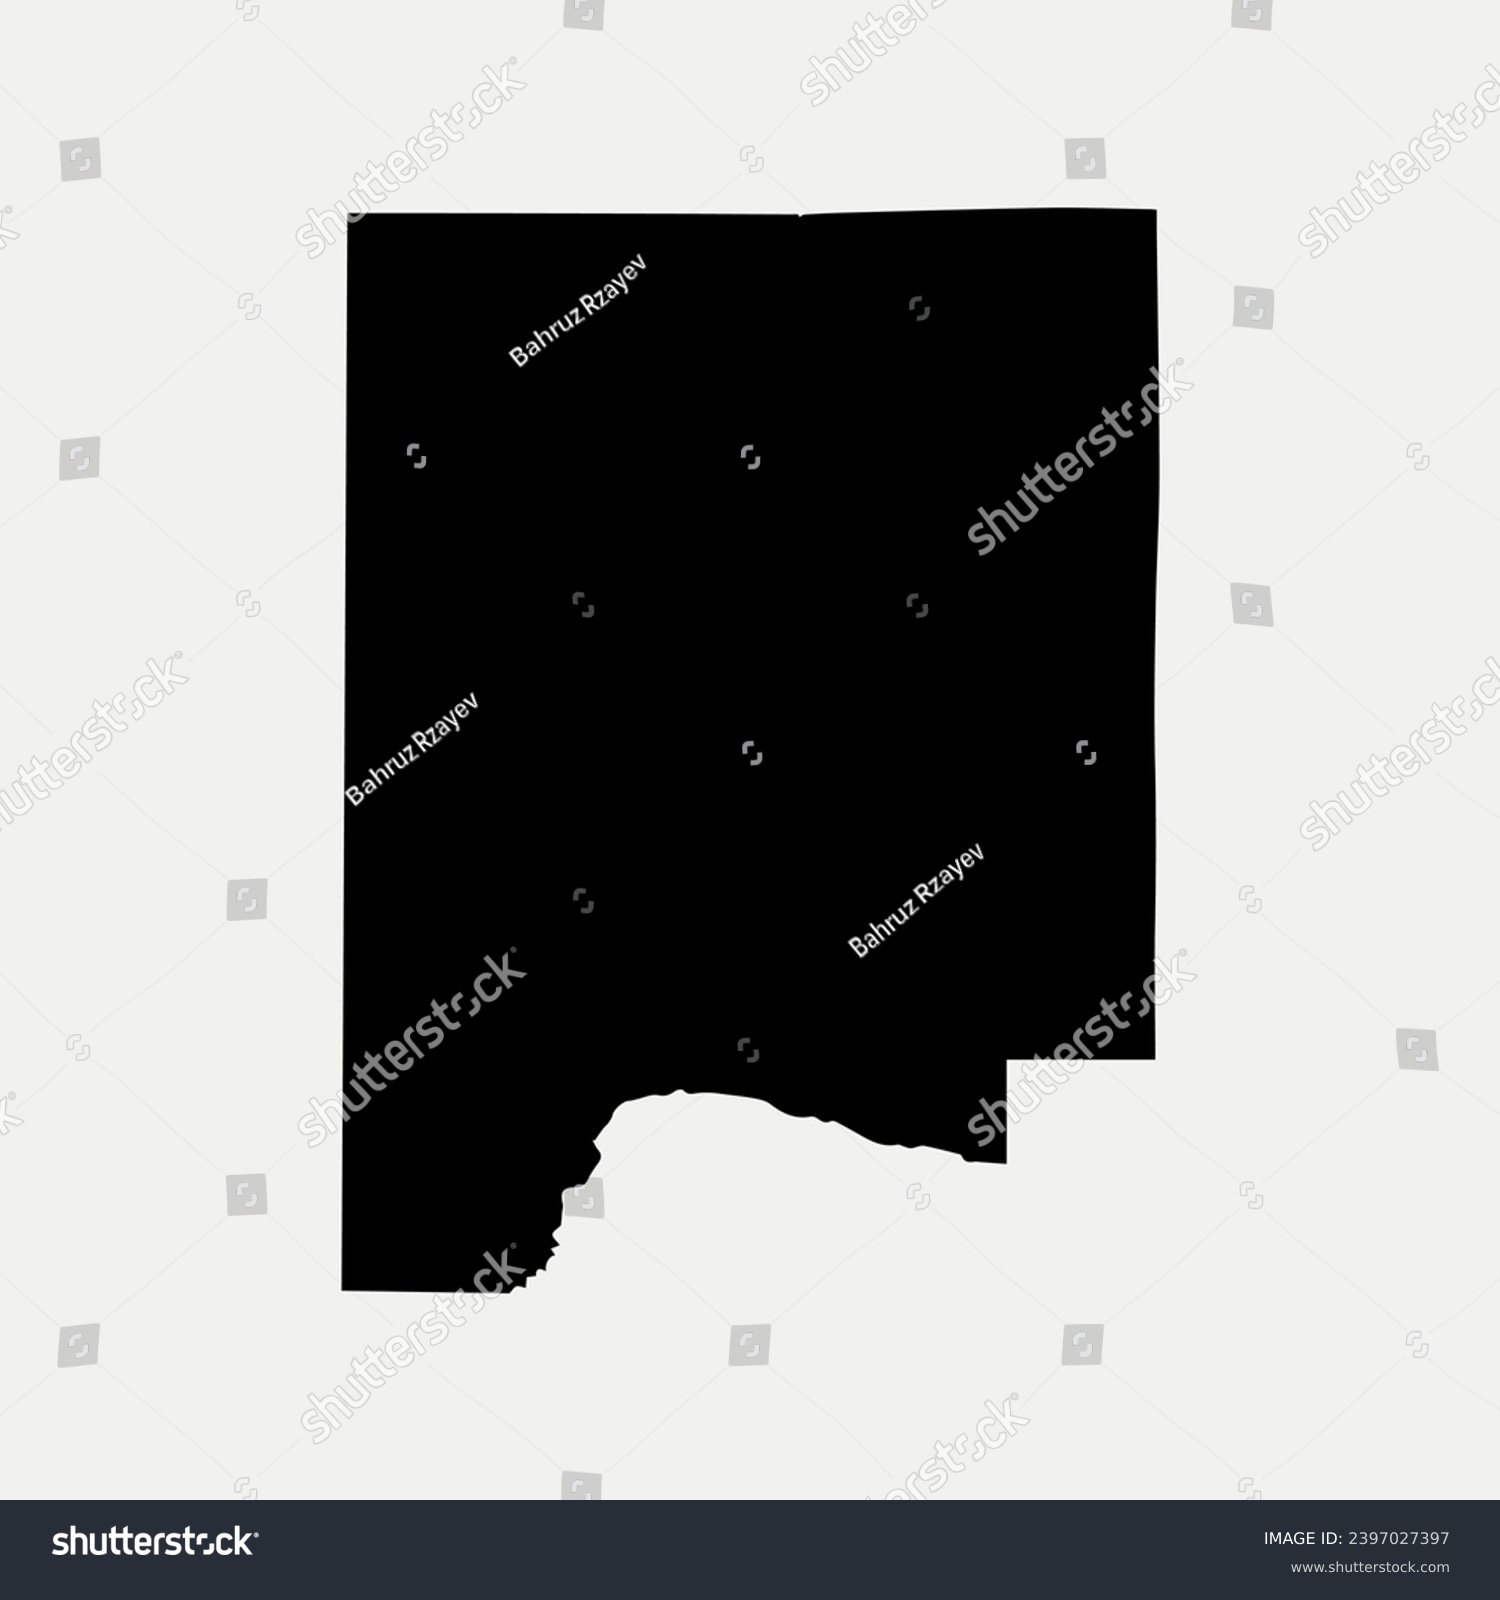 SVG of Map of Dale County - Alabama - United States outline silhouette graphic element Illustration template design
 svg